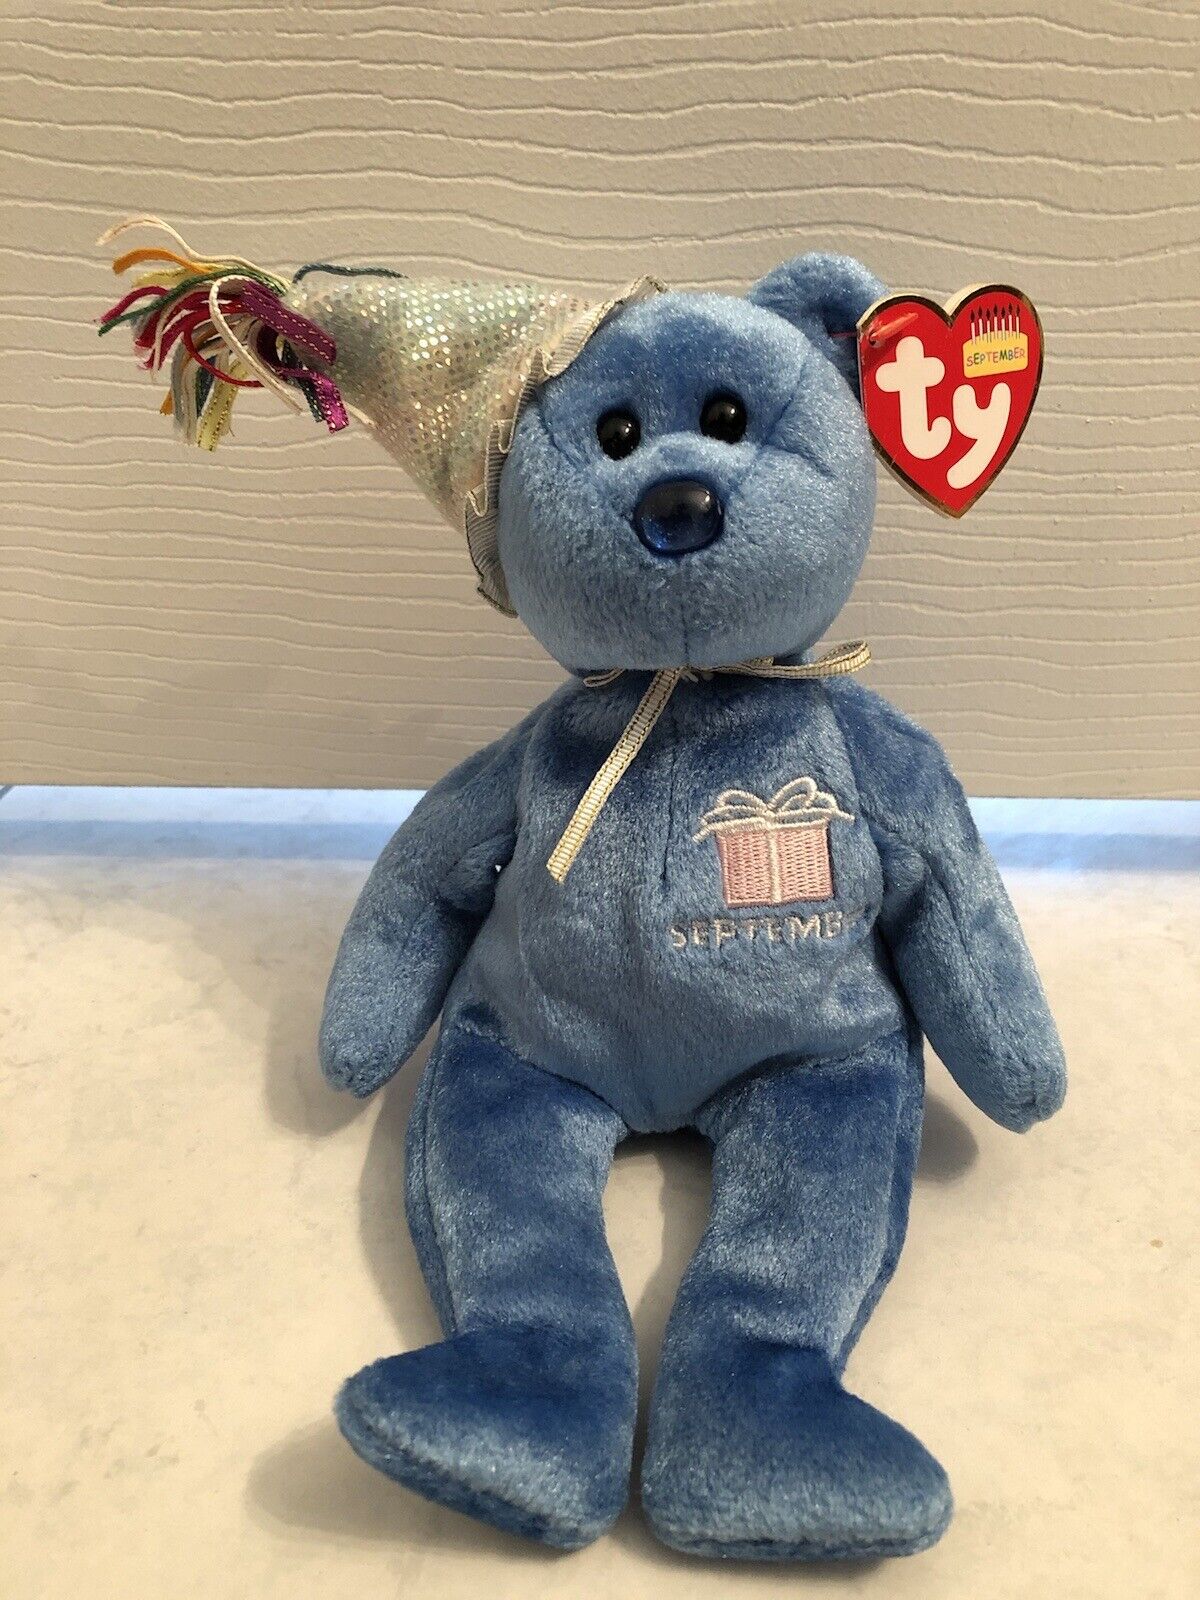 September Birthday Bear Ty Beanie Baby 2nd Series With Party Hat MWMT Retired for sale online